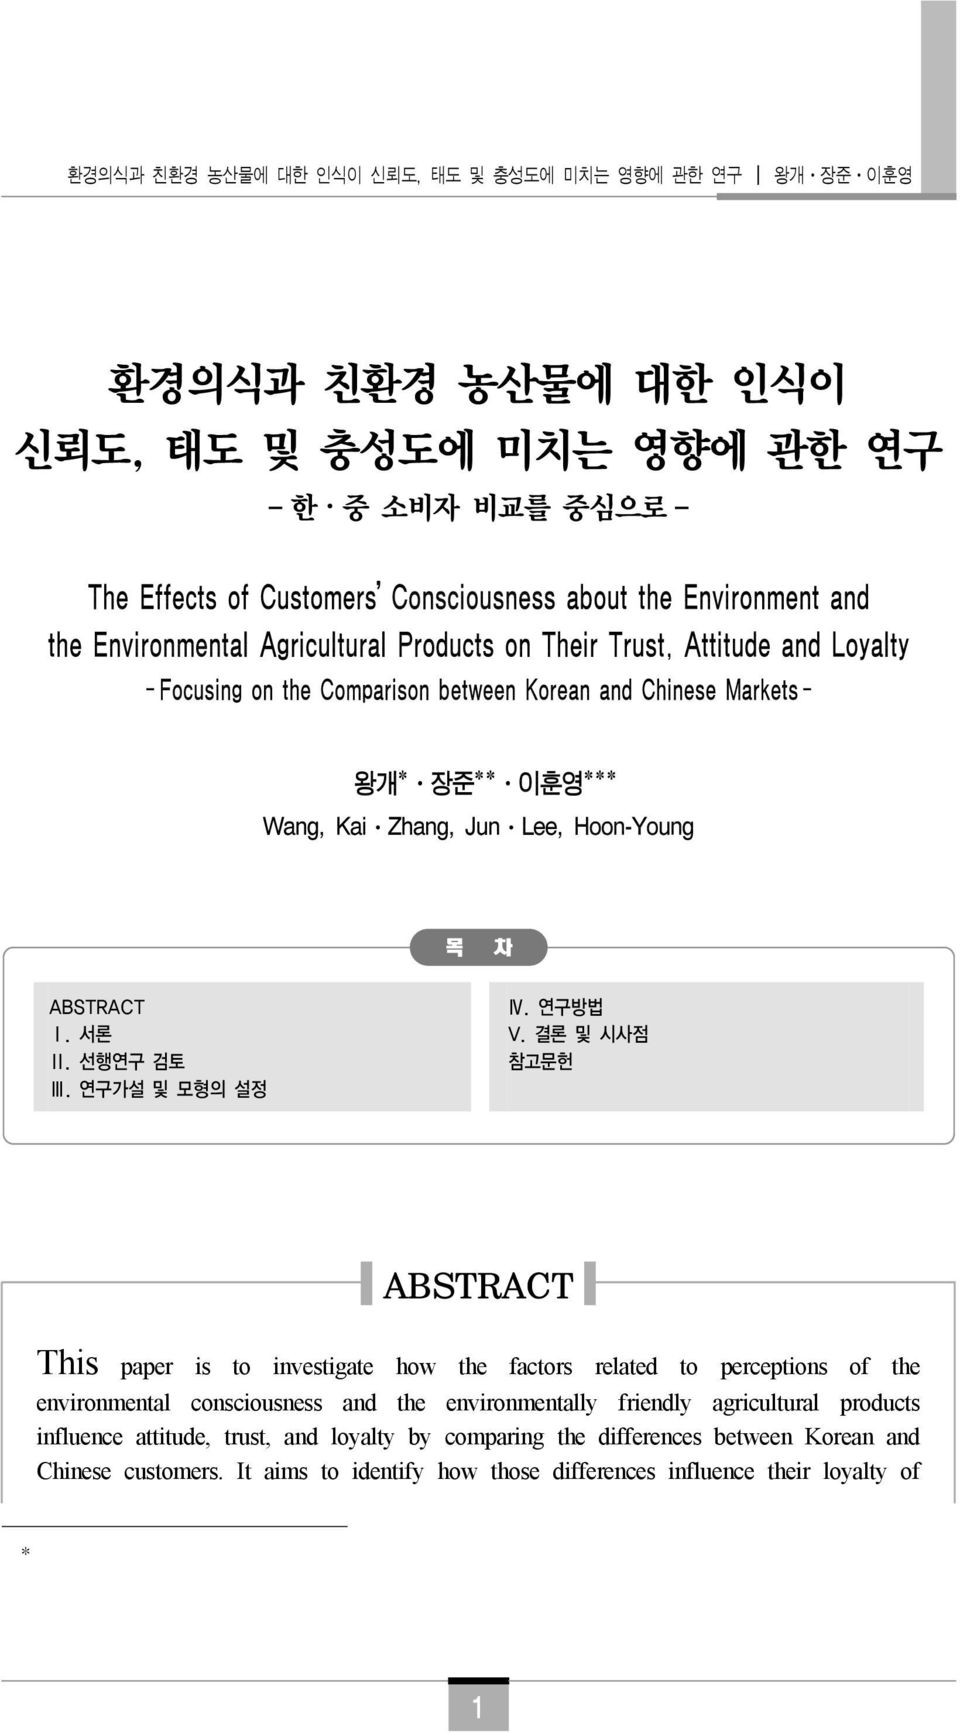 environmentally friendly agricultural products influence attitude, trust, and loyalty by comparing the differences between Korean and